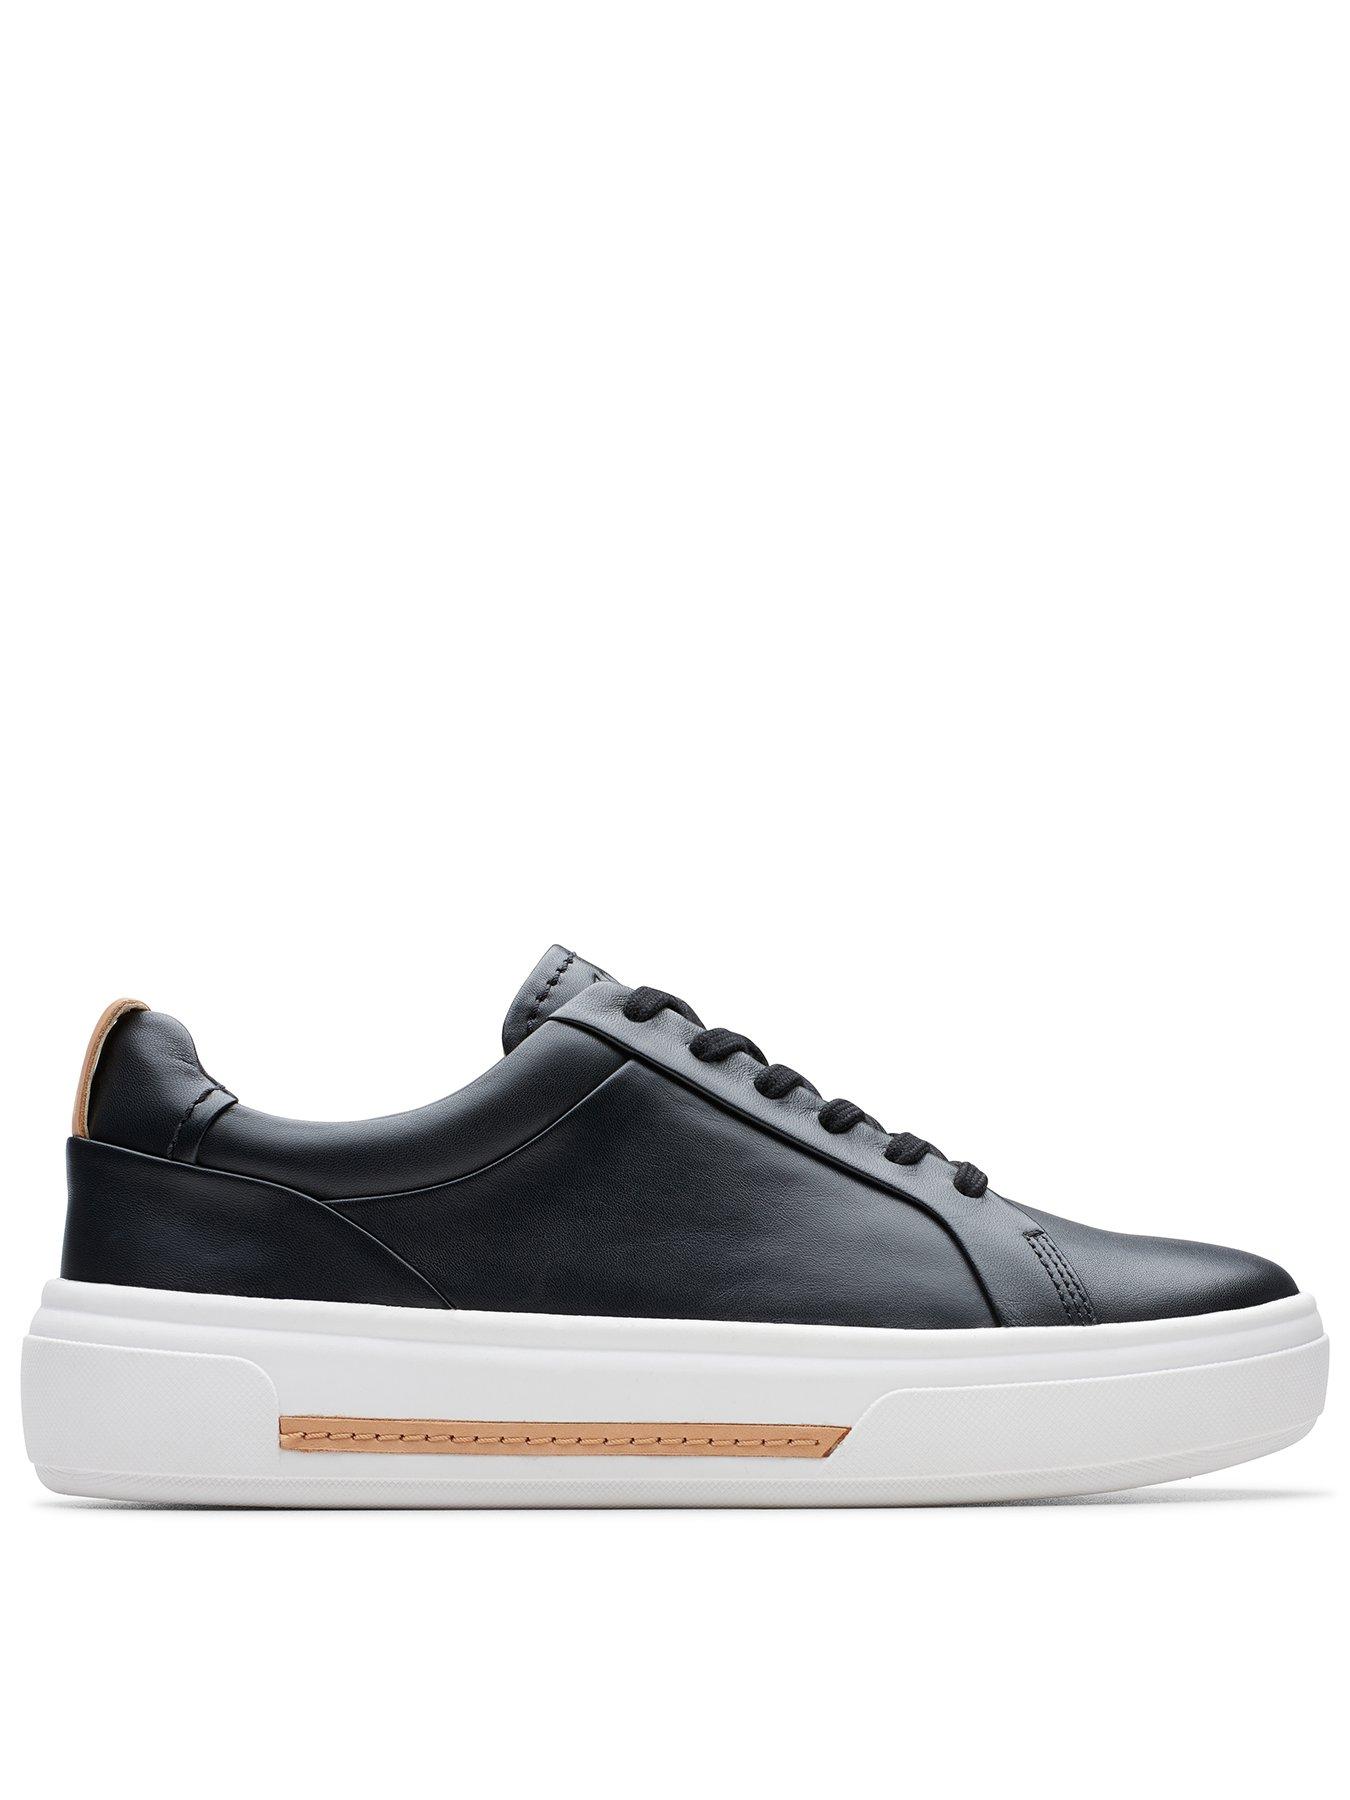 Clarks Hollyhock Walk Leather Metallic Lace Up Trainers - Black | very ...